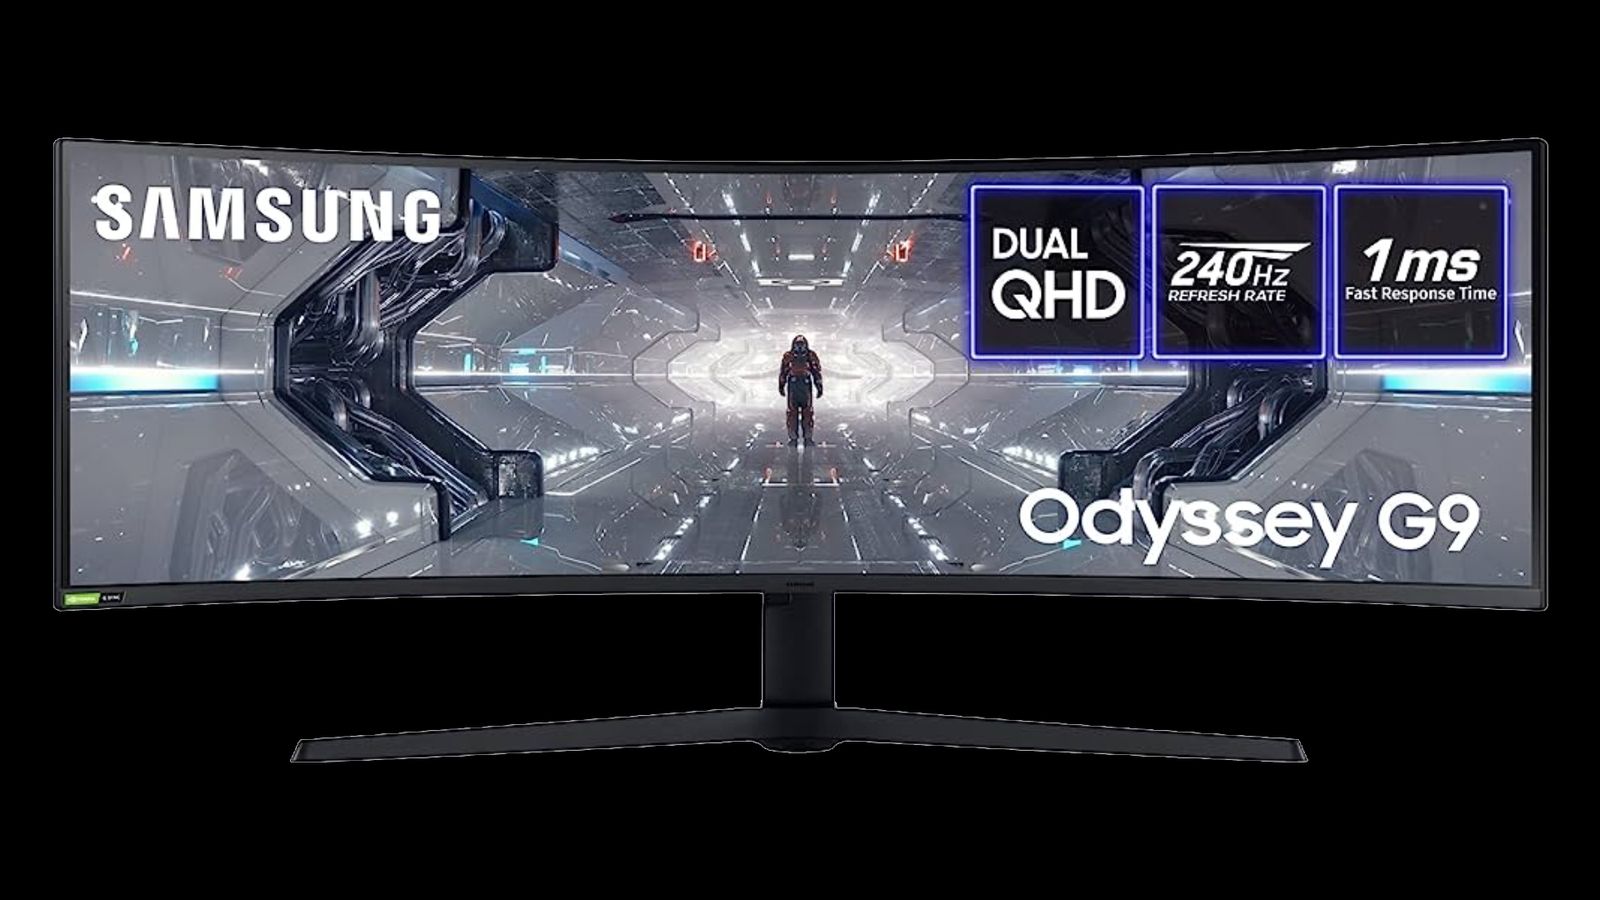 Samsung Odyssey G9 product image of an ultra-wide, black-framed, curved Samsung monitor.